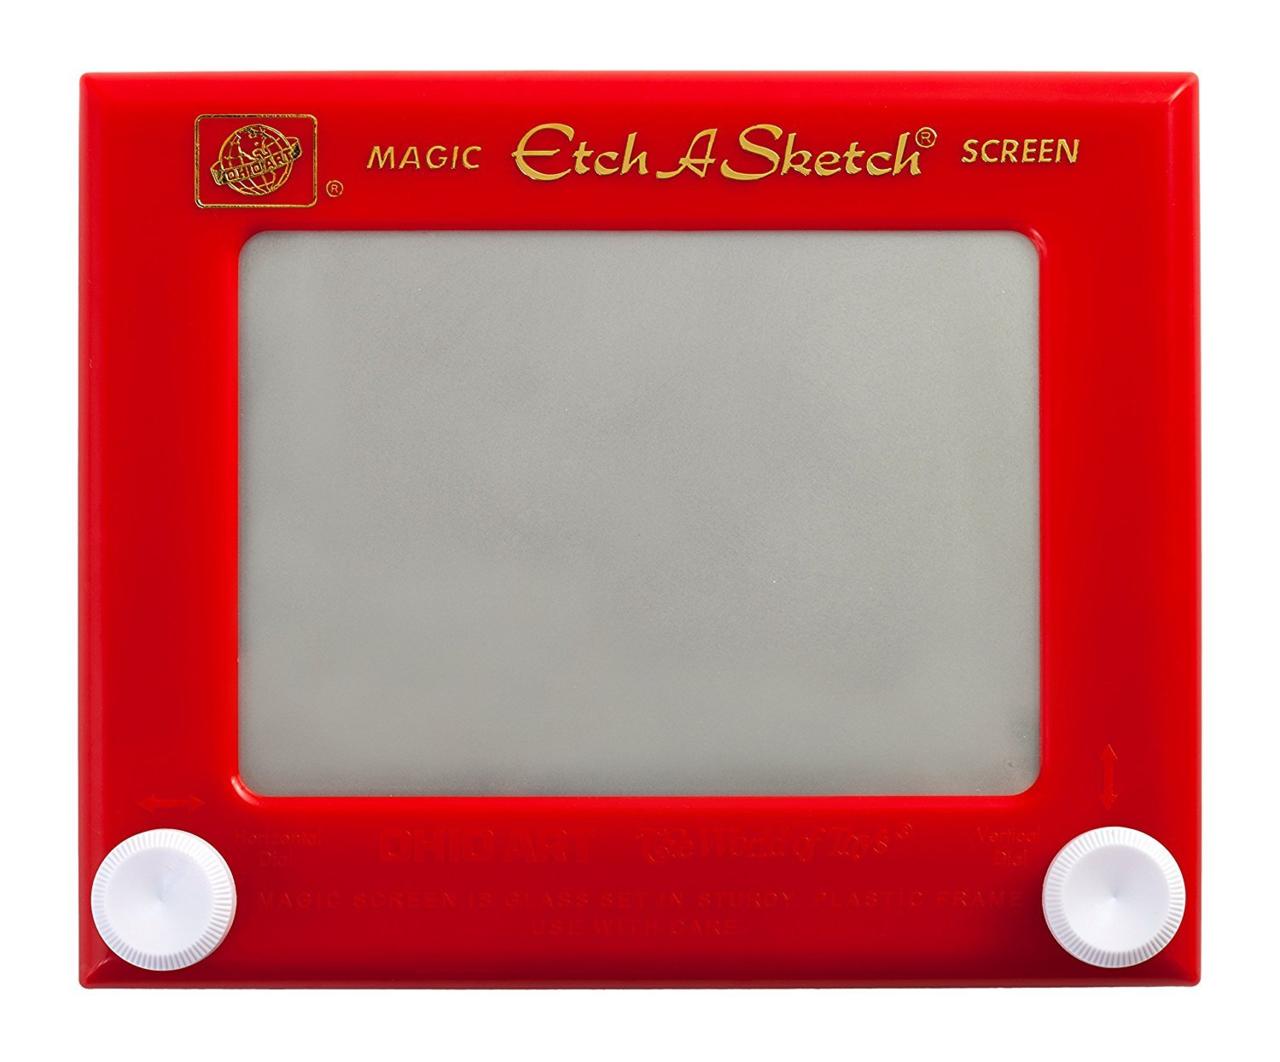 Halliday has an Etch A Sketch on his desk at the end